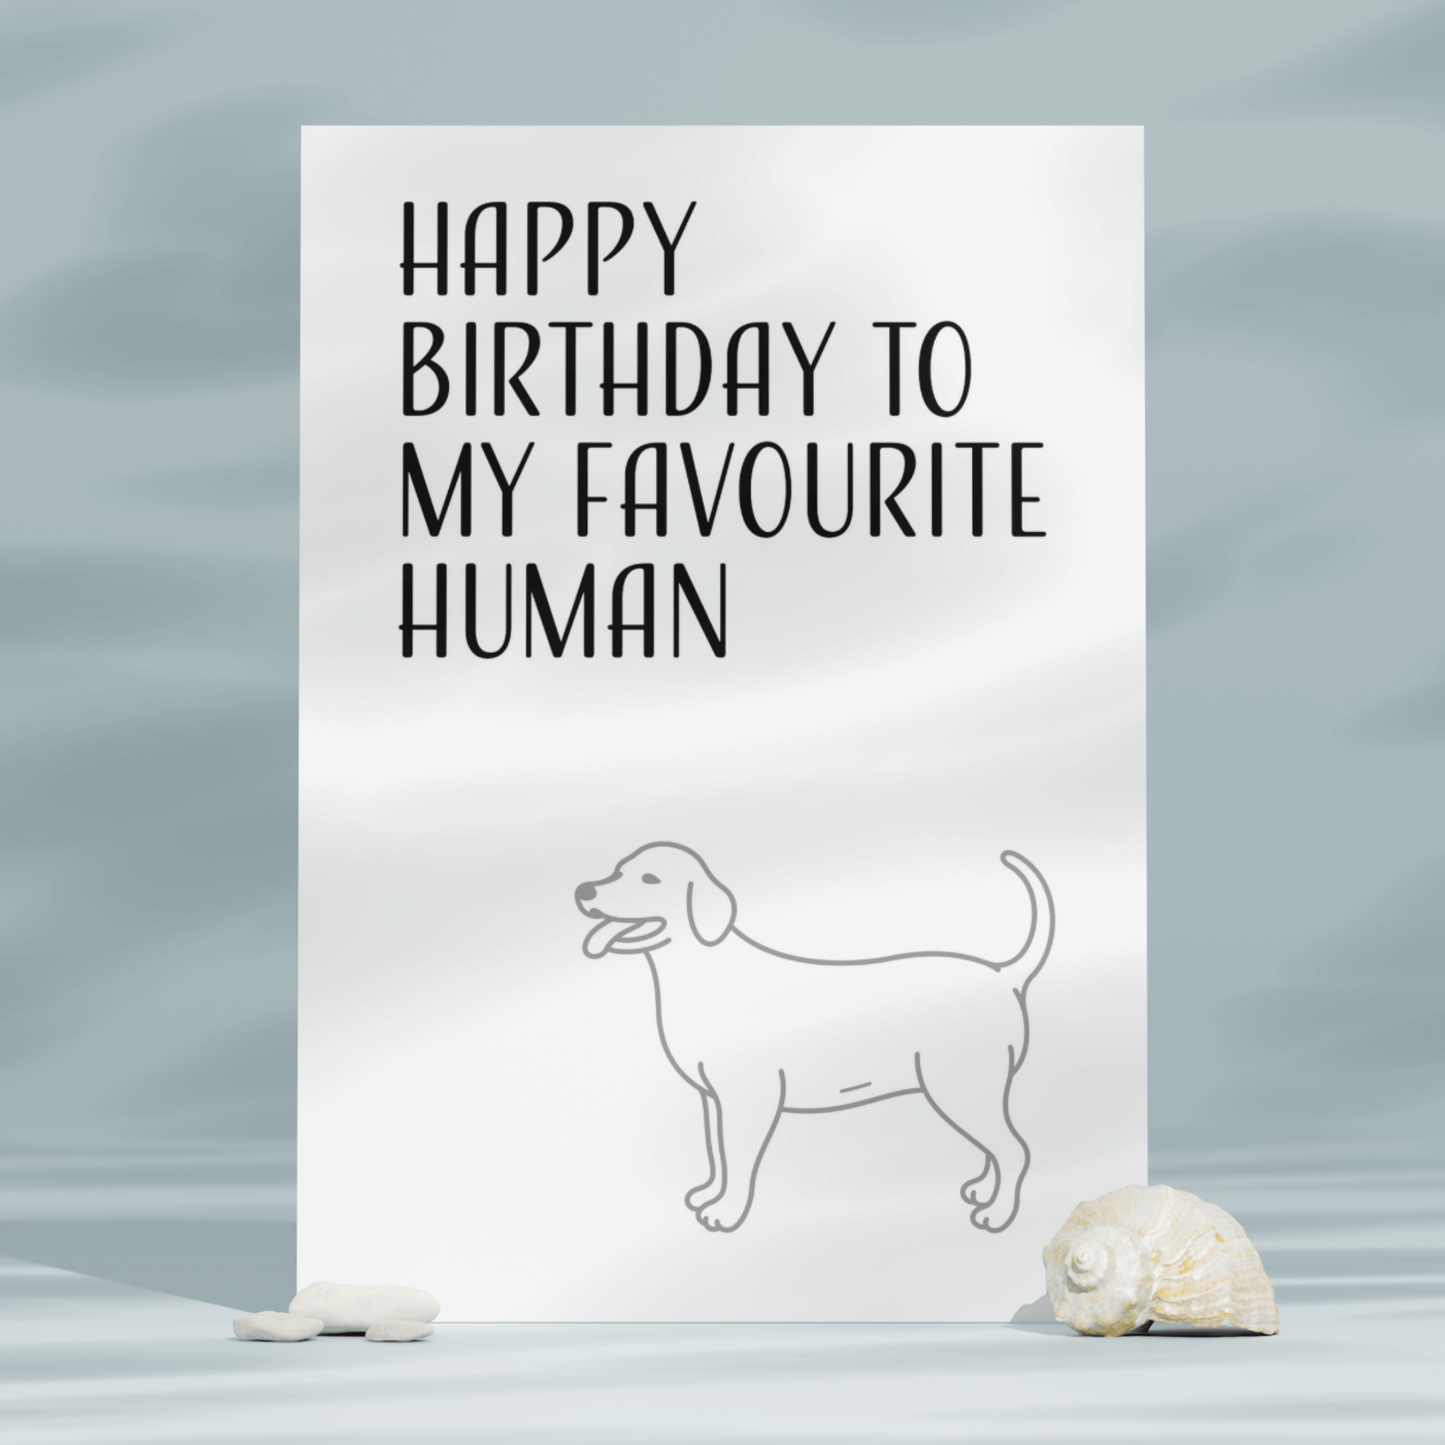 Little Kraken's Happy Birthday to my Favourite Human, Birthday Cards for £3.50 each